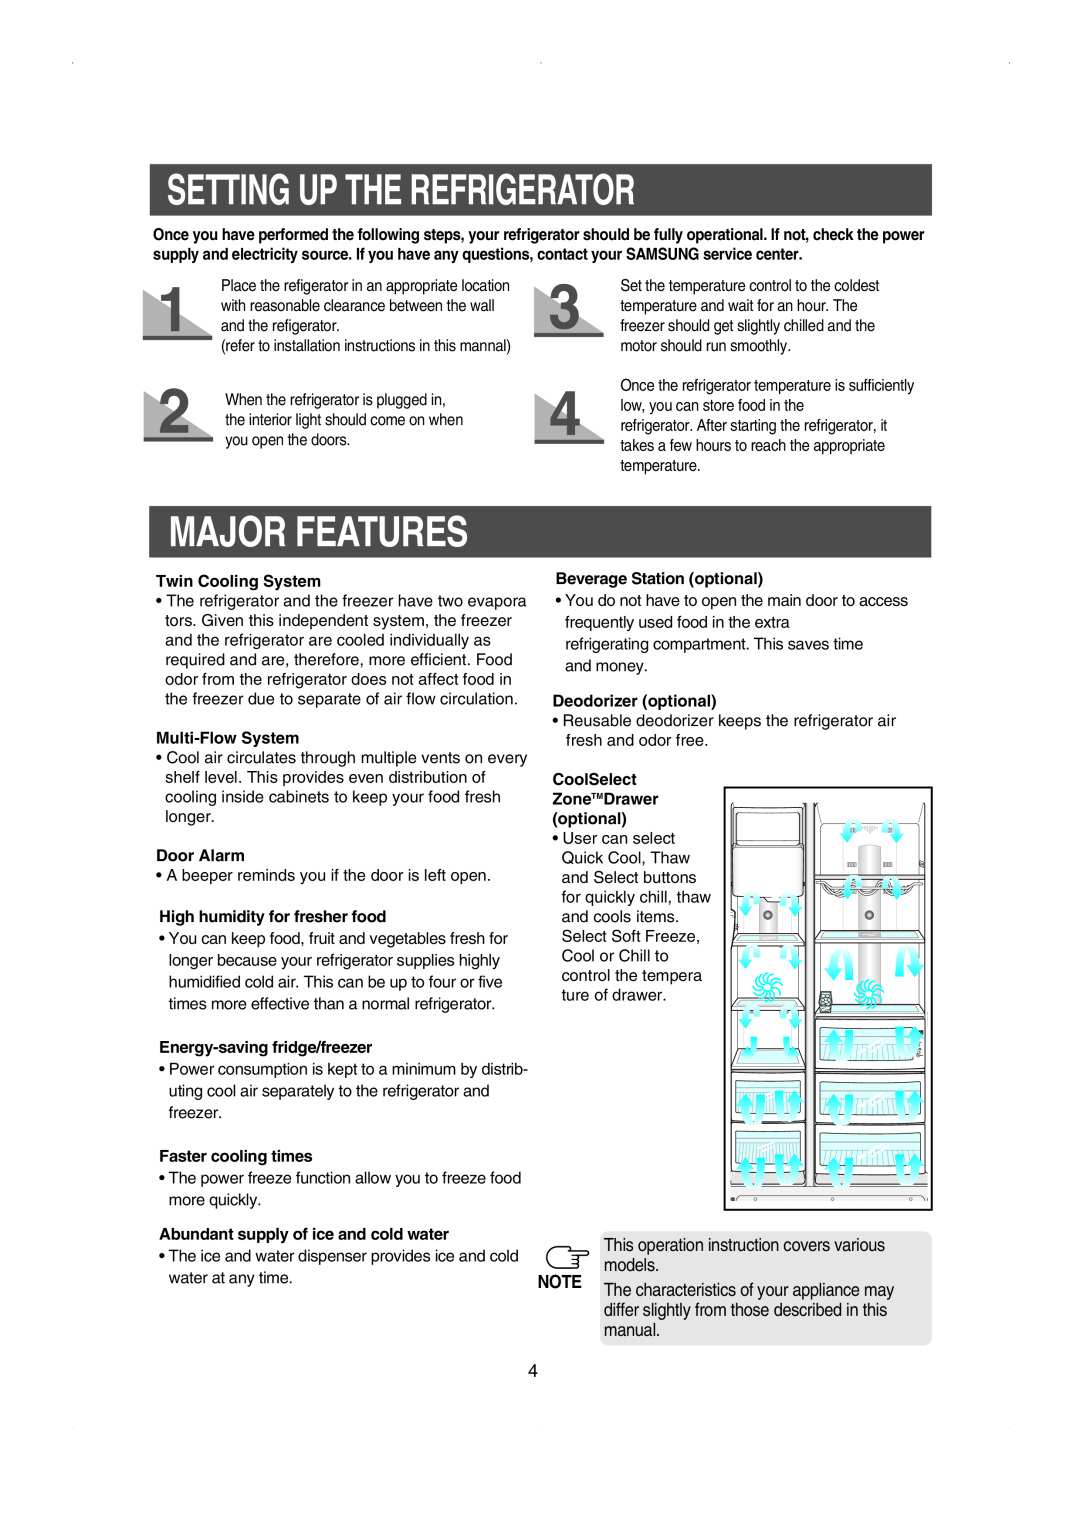 Samsung RS23FESW owner manual Setting Up The Refrigerator, Major Features, models 